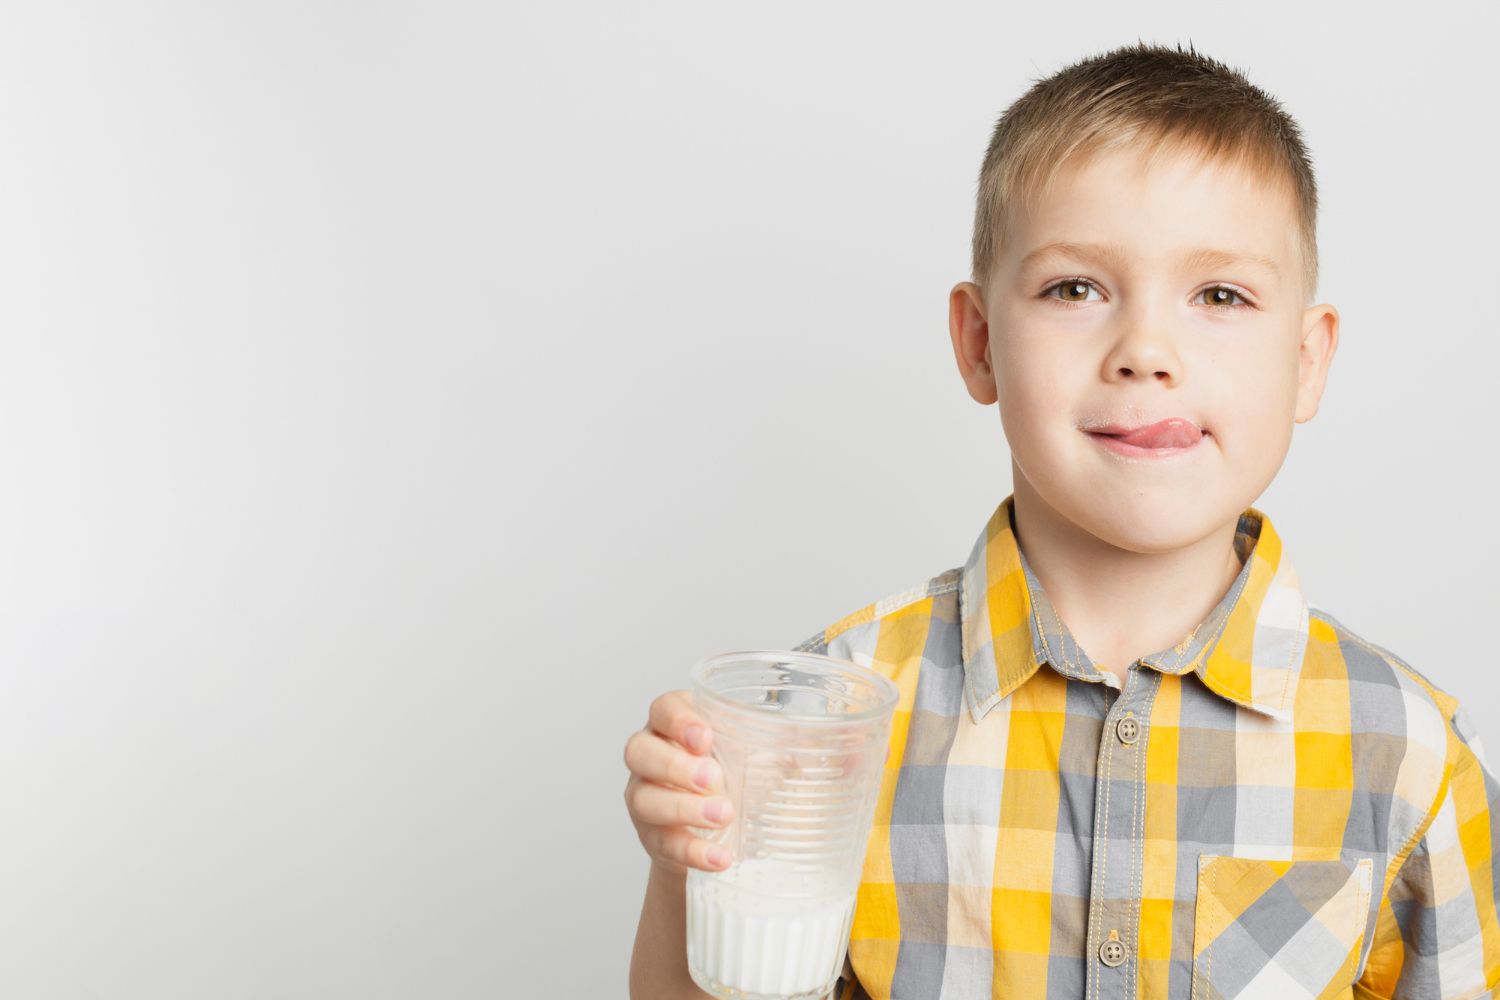 Best Times to Drink Milk, Based on Different Purposes